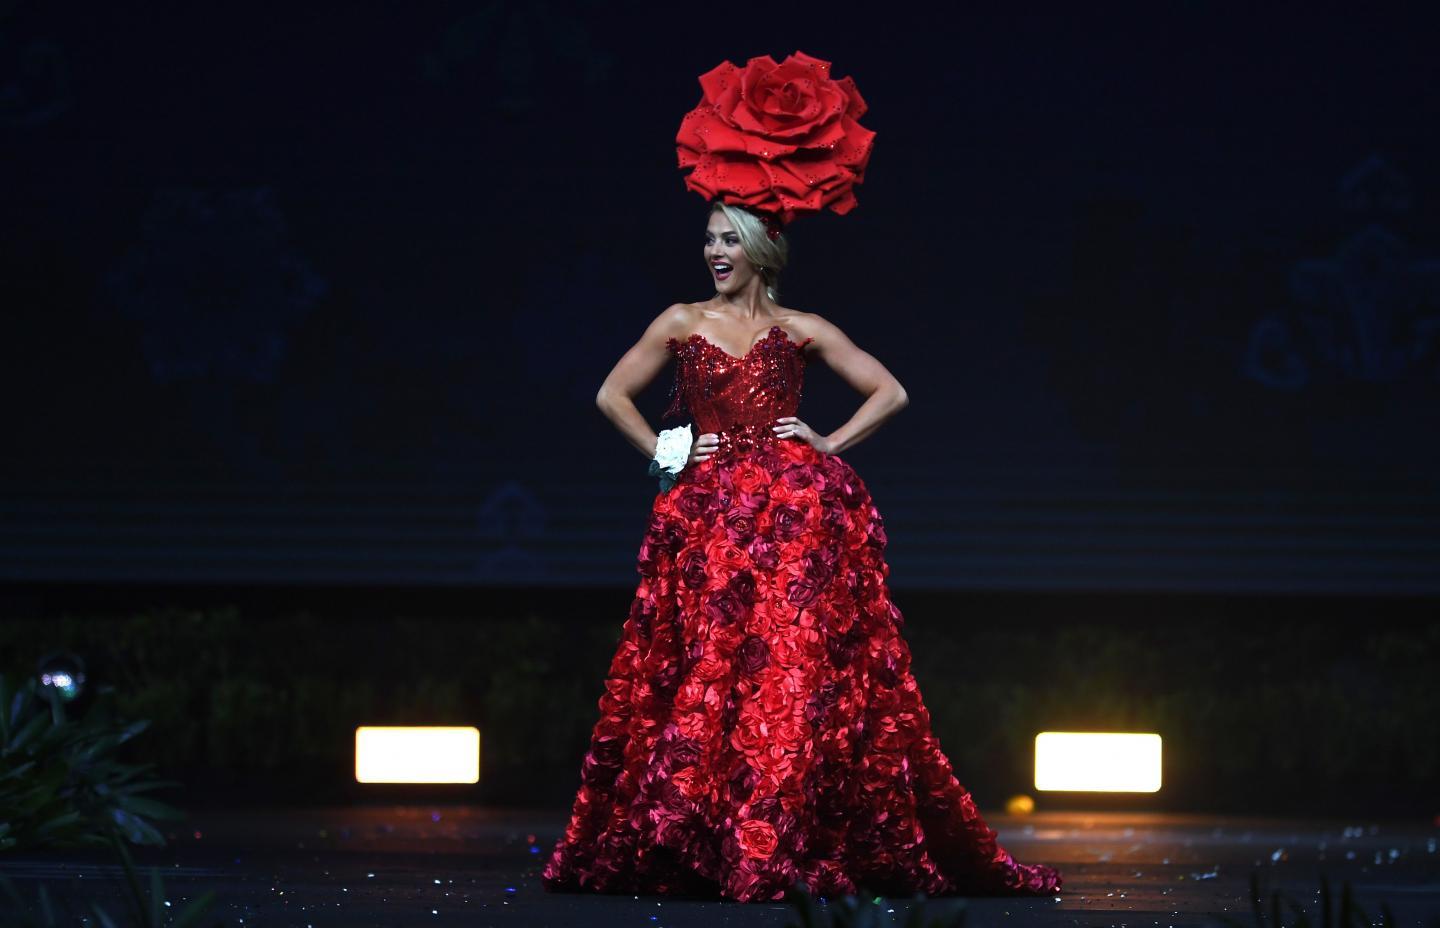 Who Is Sarah Rose Summers? Miss USA Accepted To Semi Finals Despite